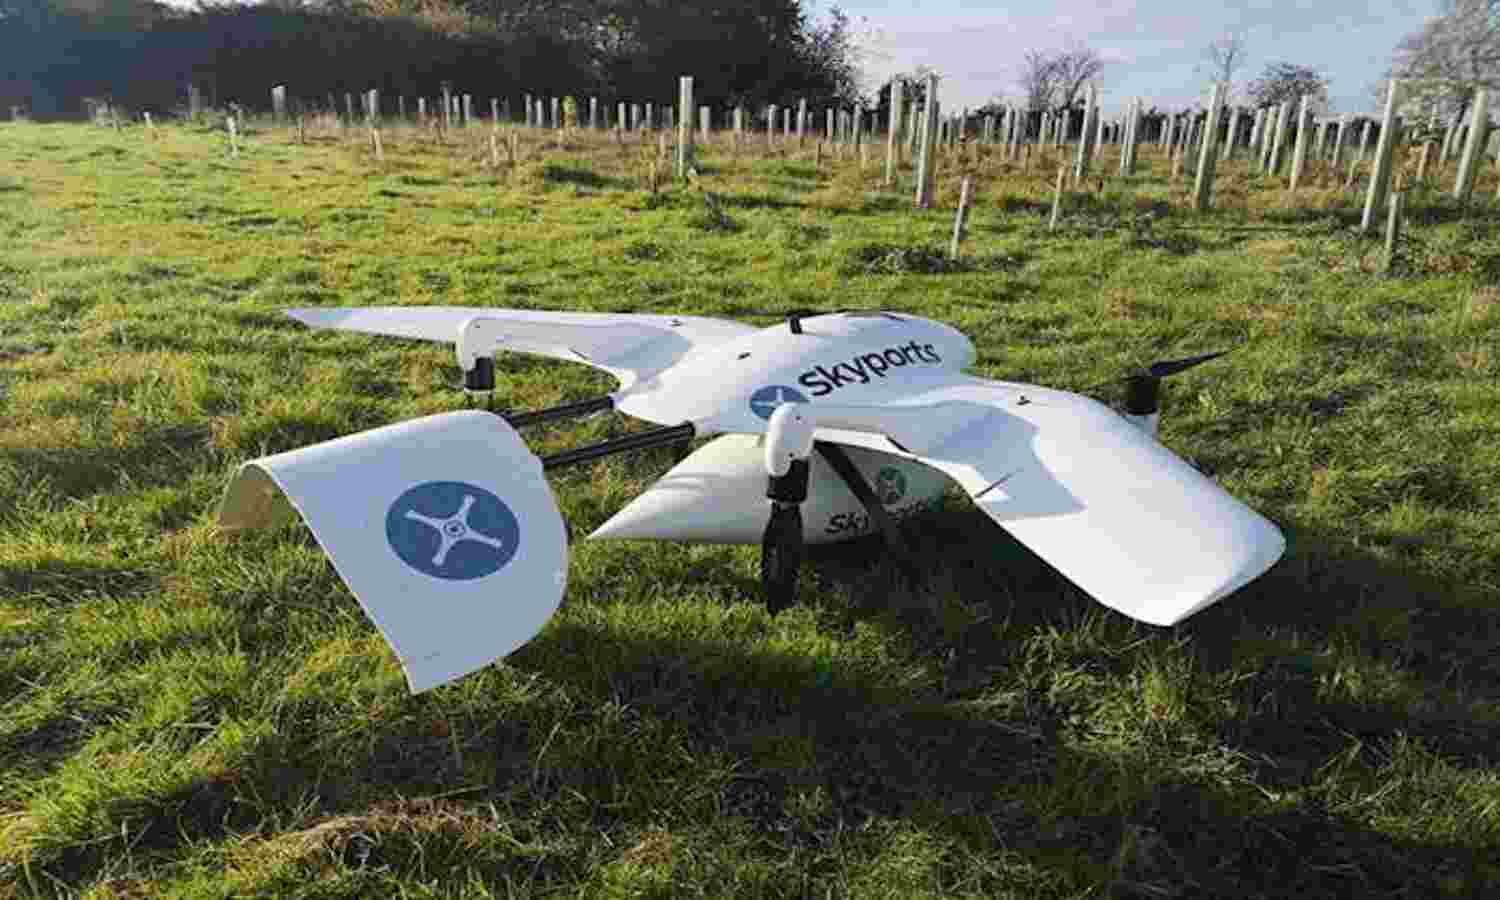 Skyports enters into marine drone deliveries with two new partnerships